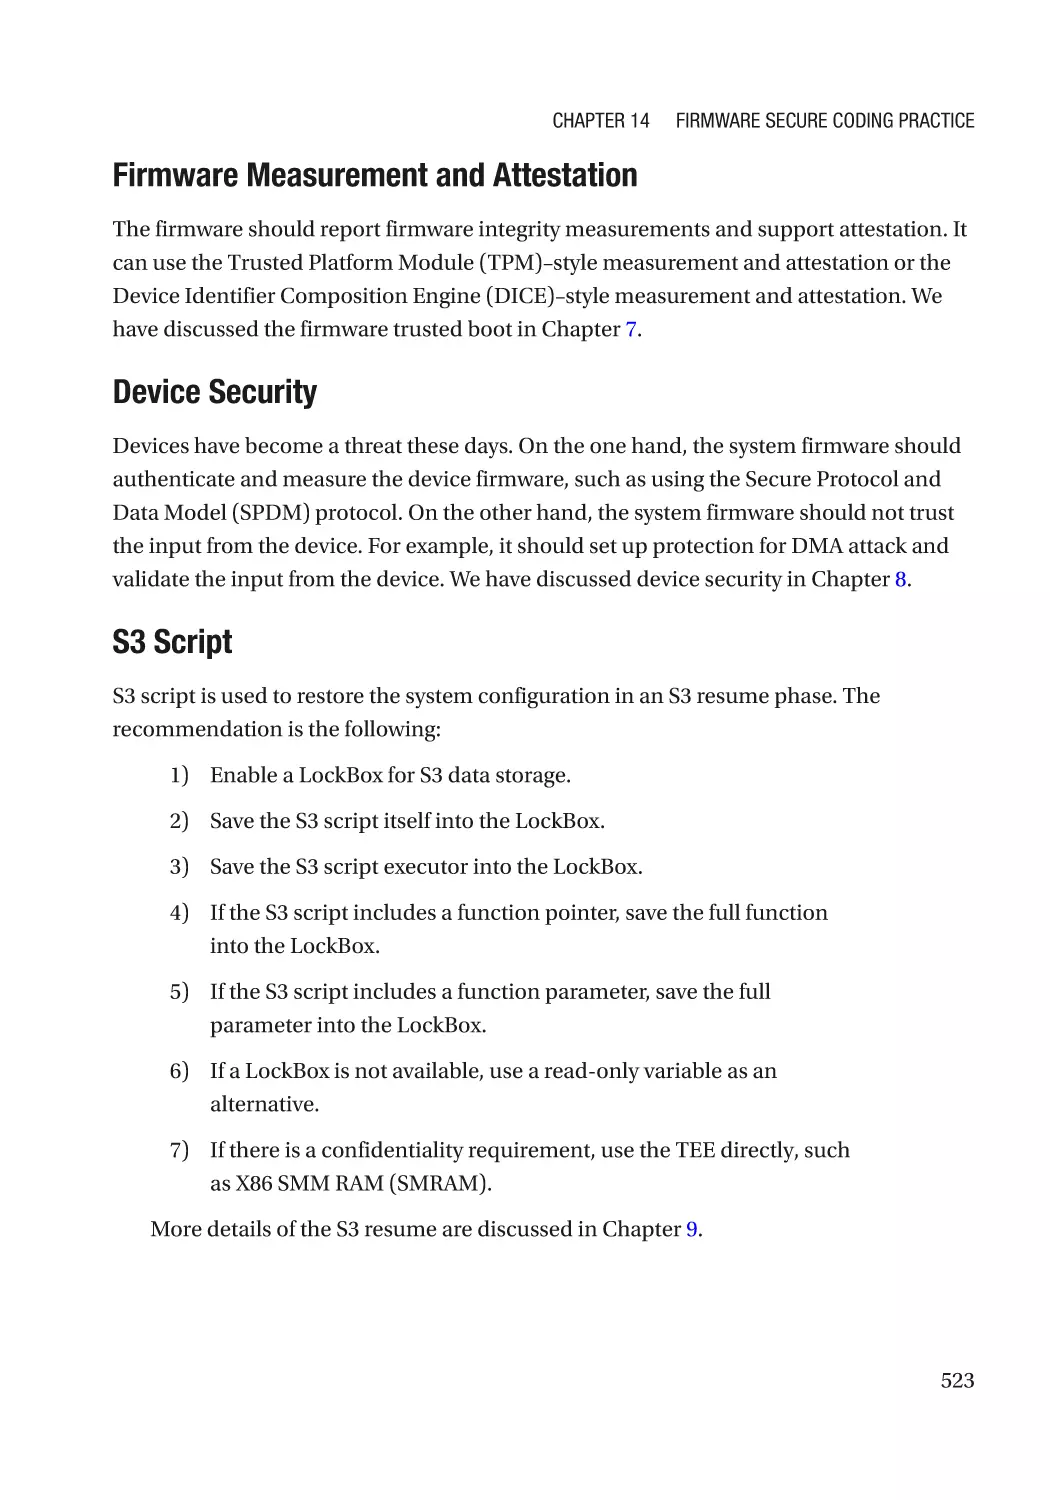 Firmware Measurement and Attestation
Device Security
S3 Script